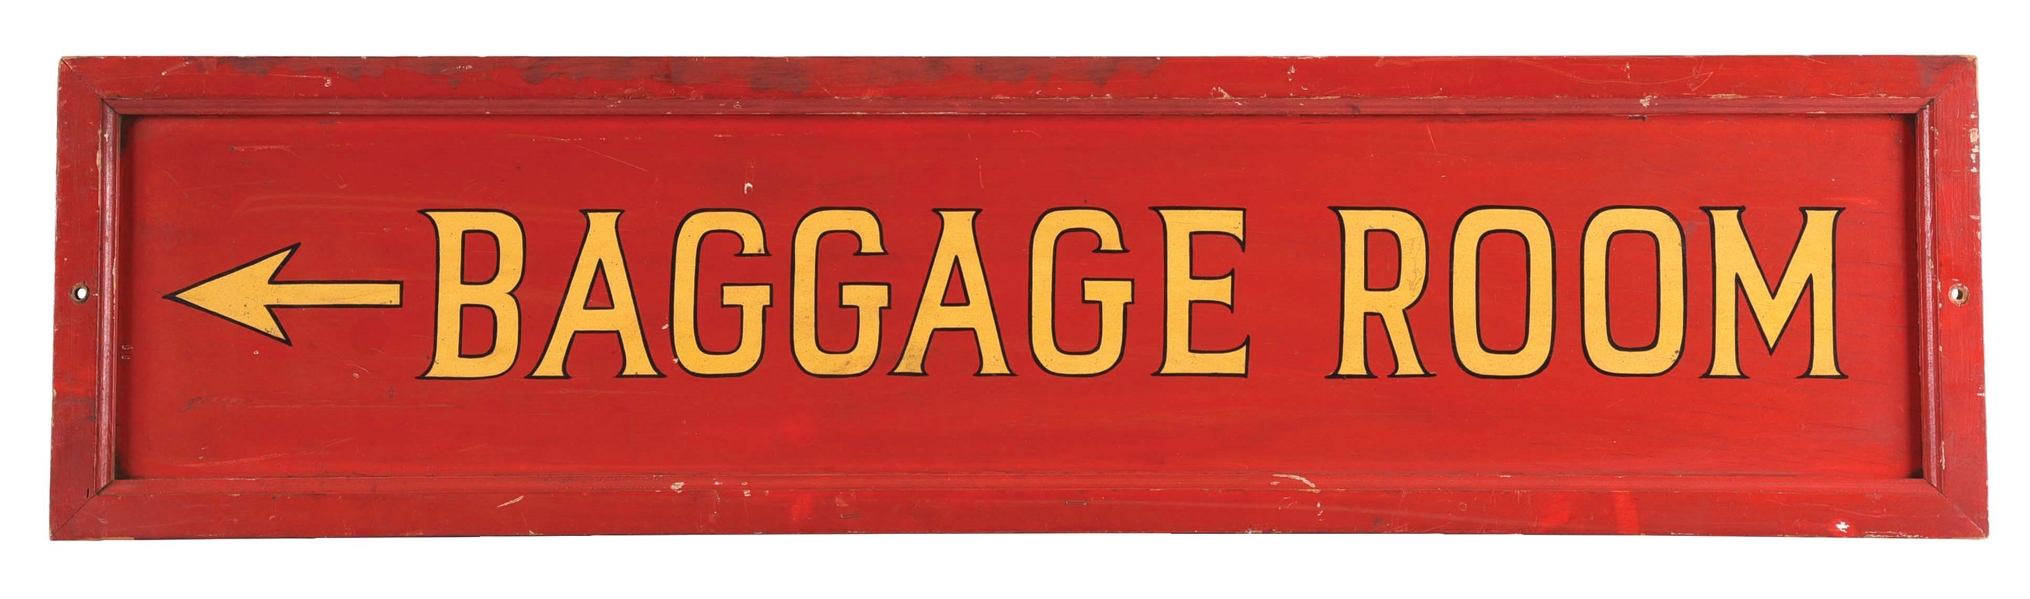 RAILWAY STATION BAGGAGE ROOM HAND PAINTED WOODEN SIGN.